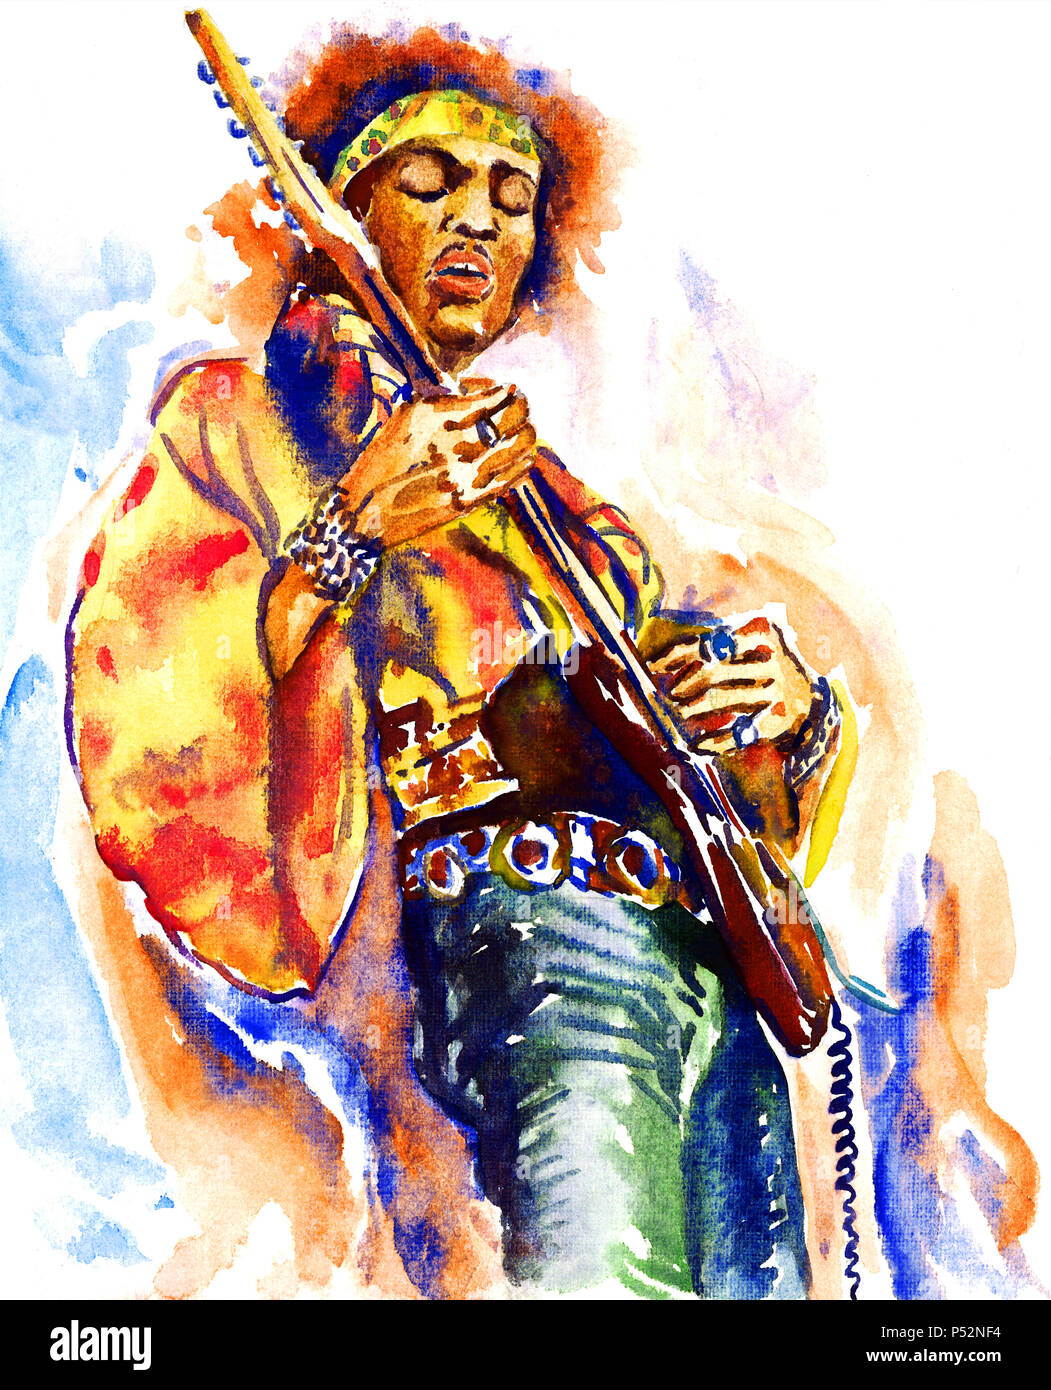 Jimi Hendrix with guitar on stage in hippie clothing: motley headscarf, yellow jacket, green trousers Stock Photo